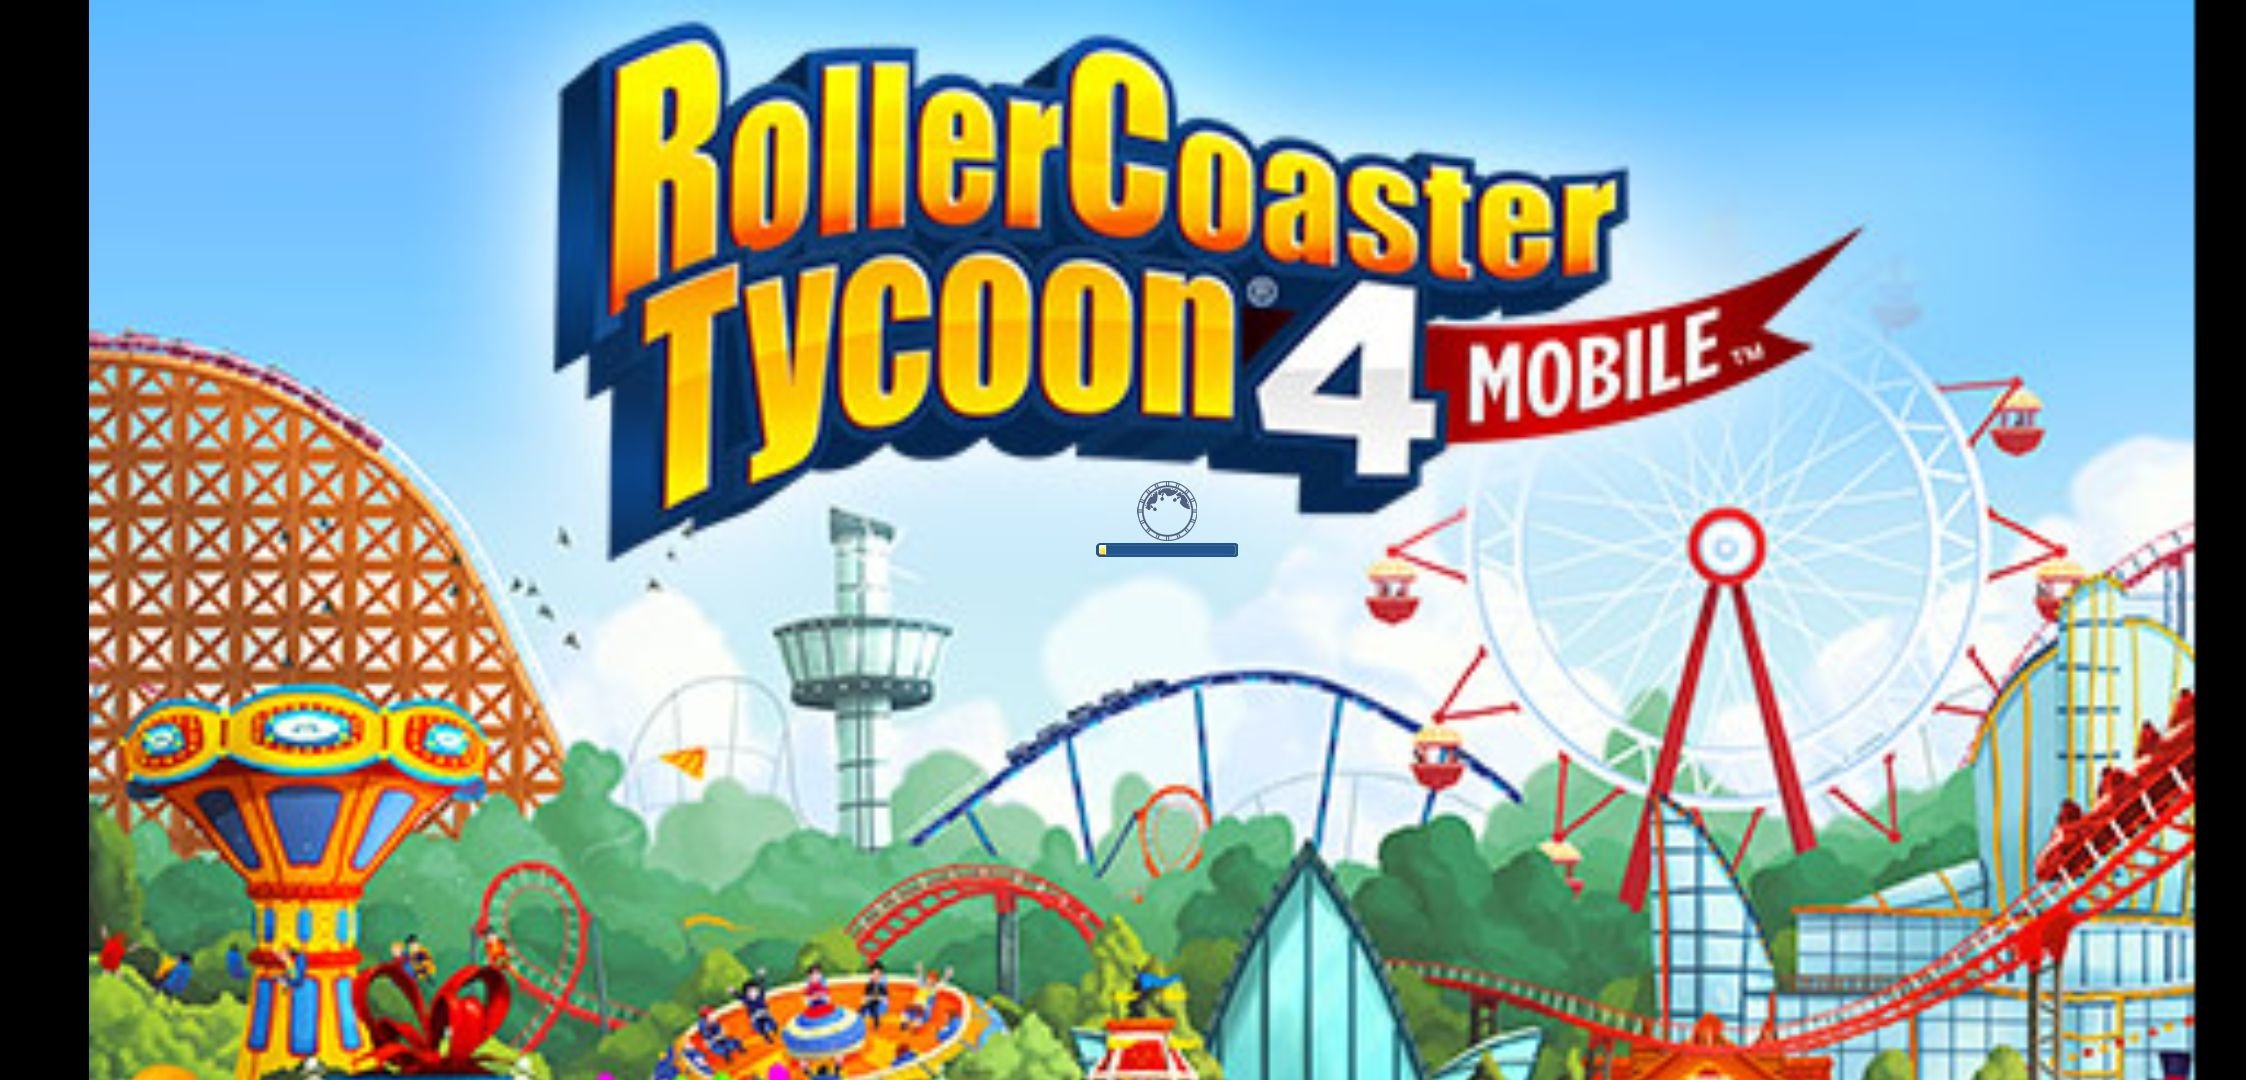 Rollercoaster tycoon 4 download full version free pc